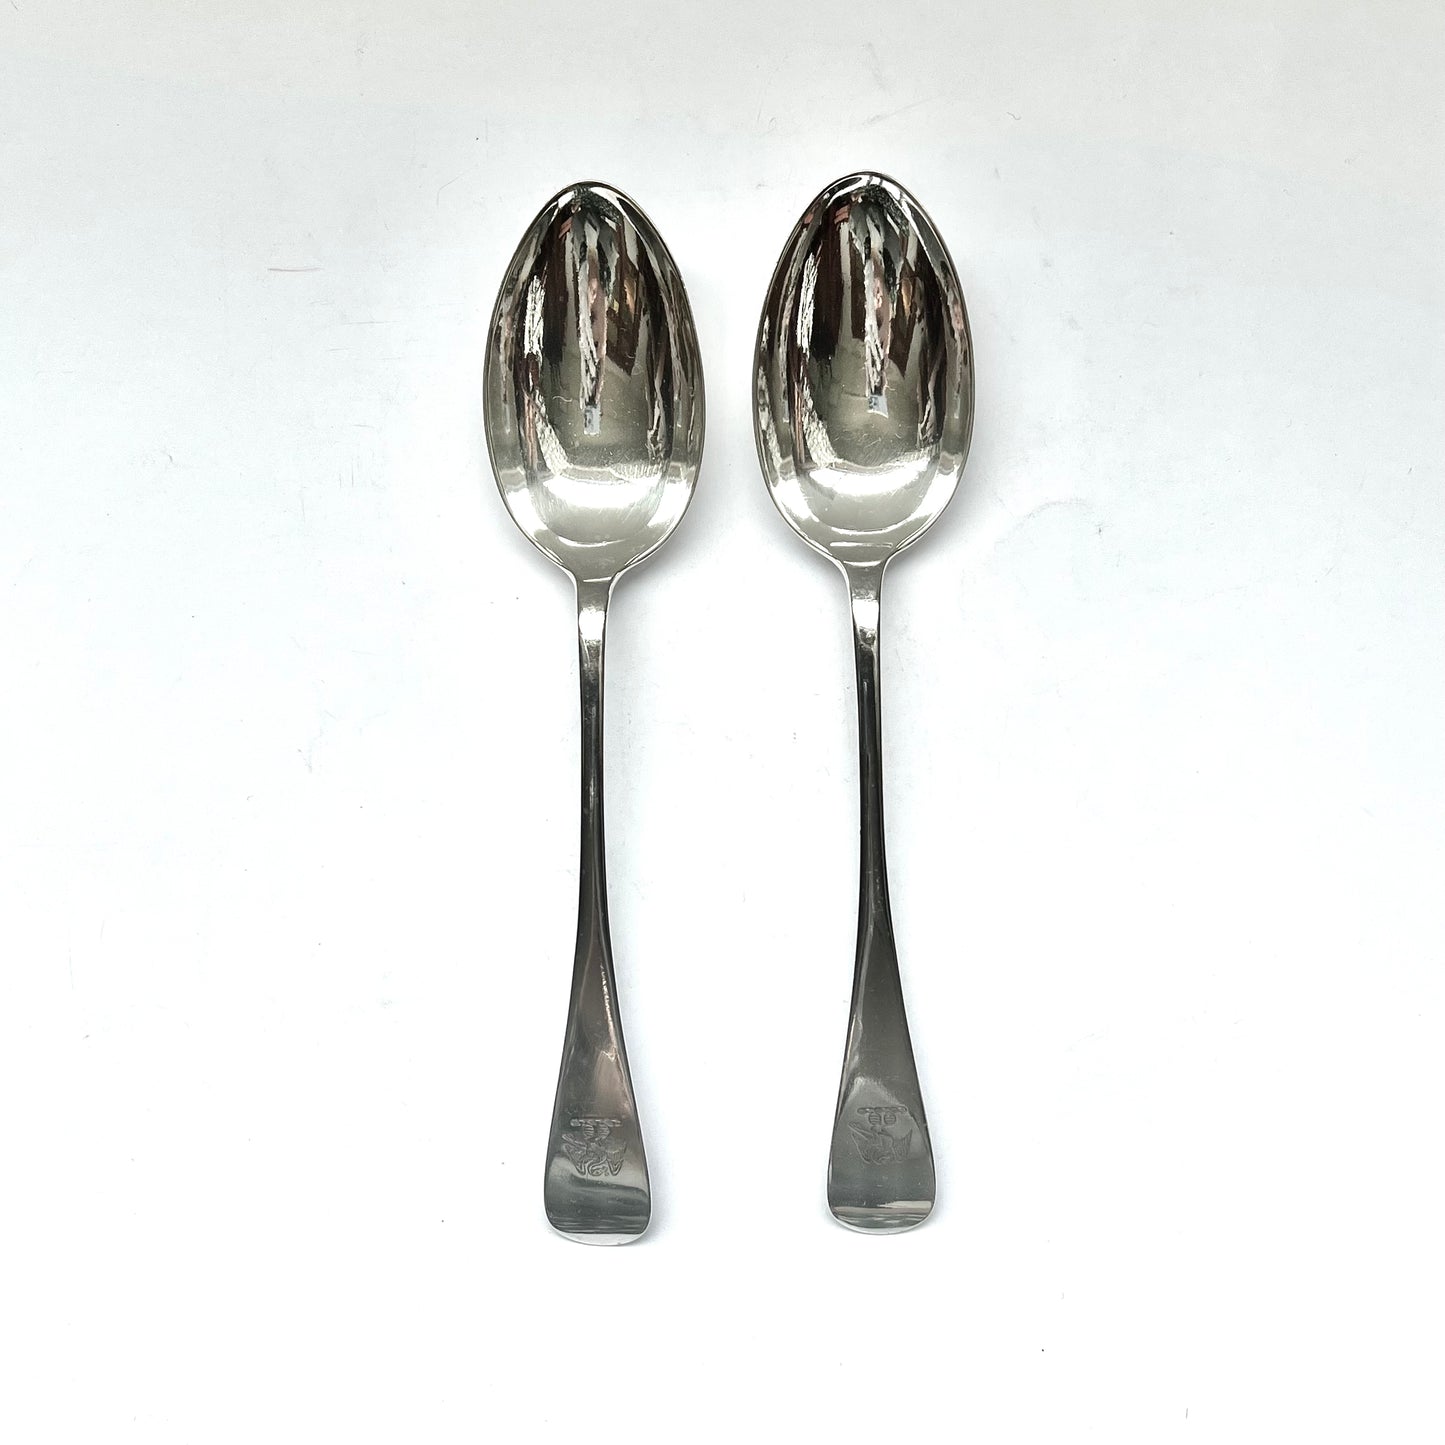 Pair of George V crested sterling silver spoons with marks for Joseph Rodgers & Sons, Sheffield, 1911.